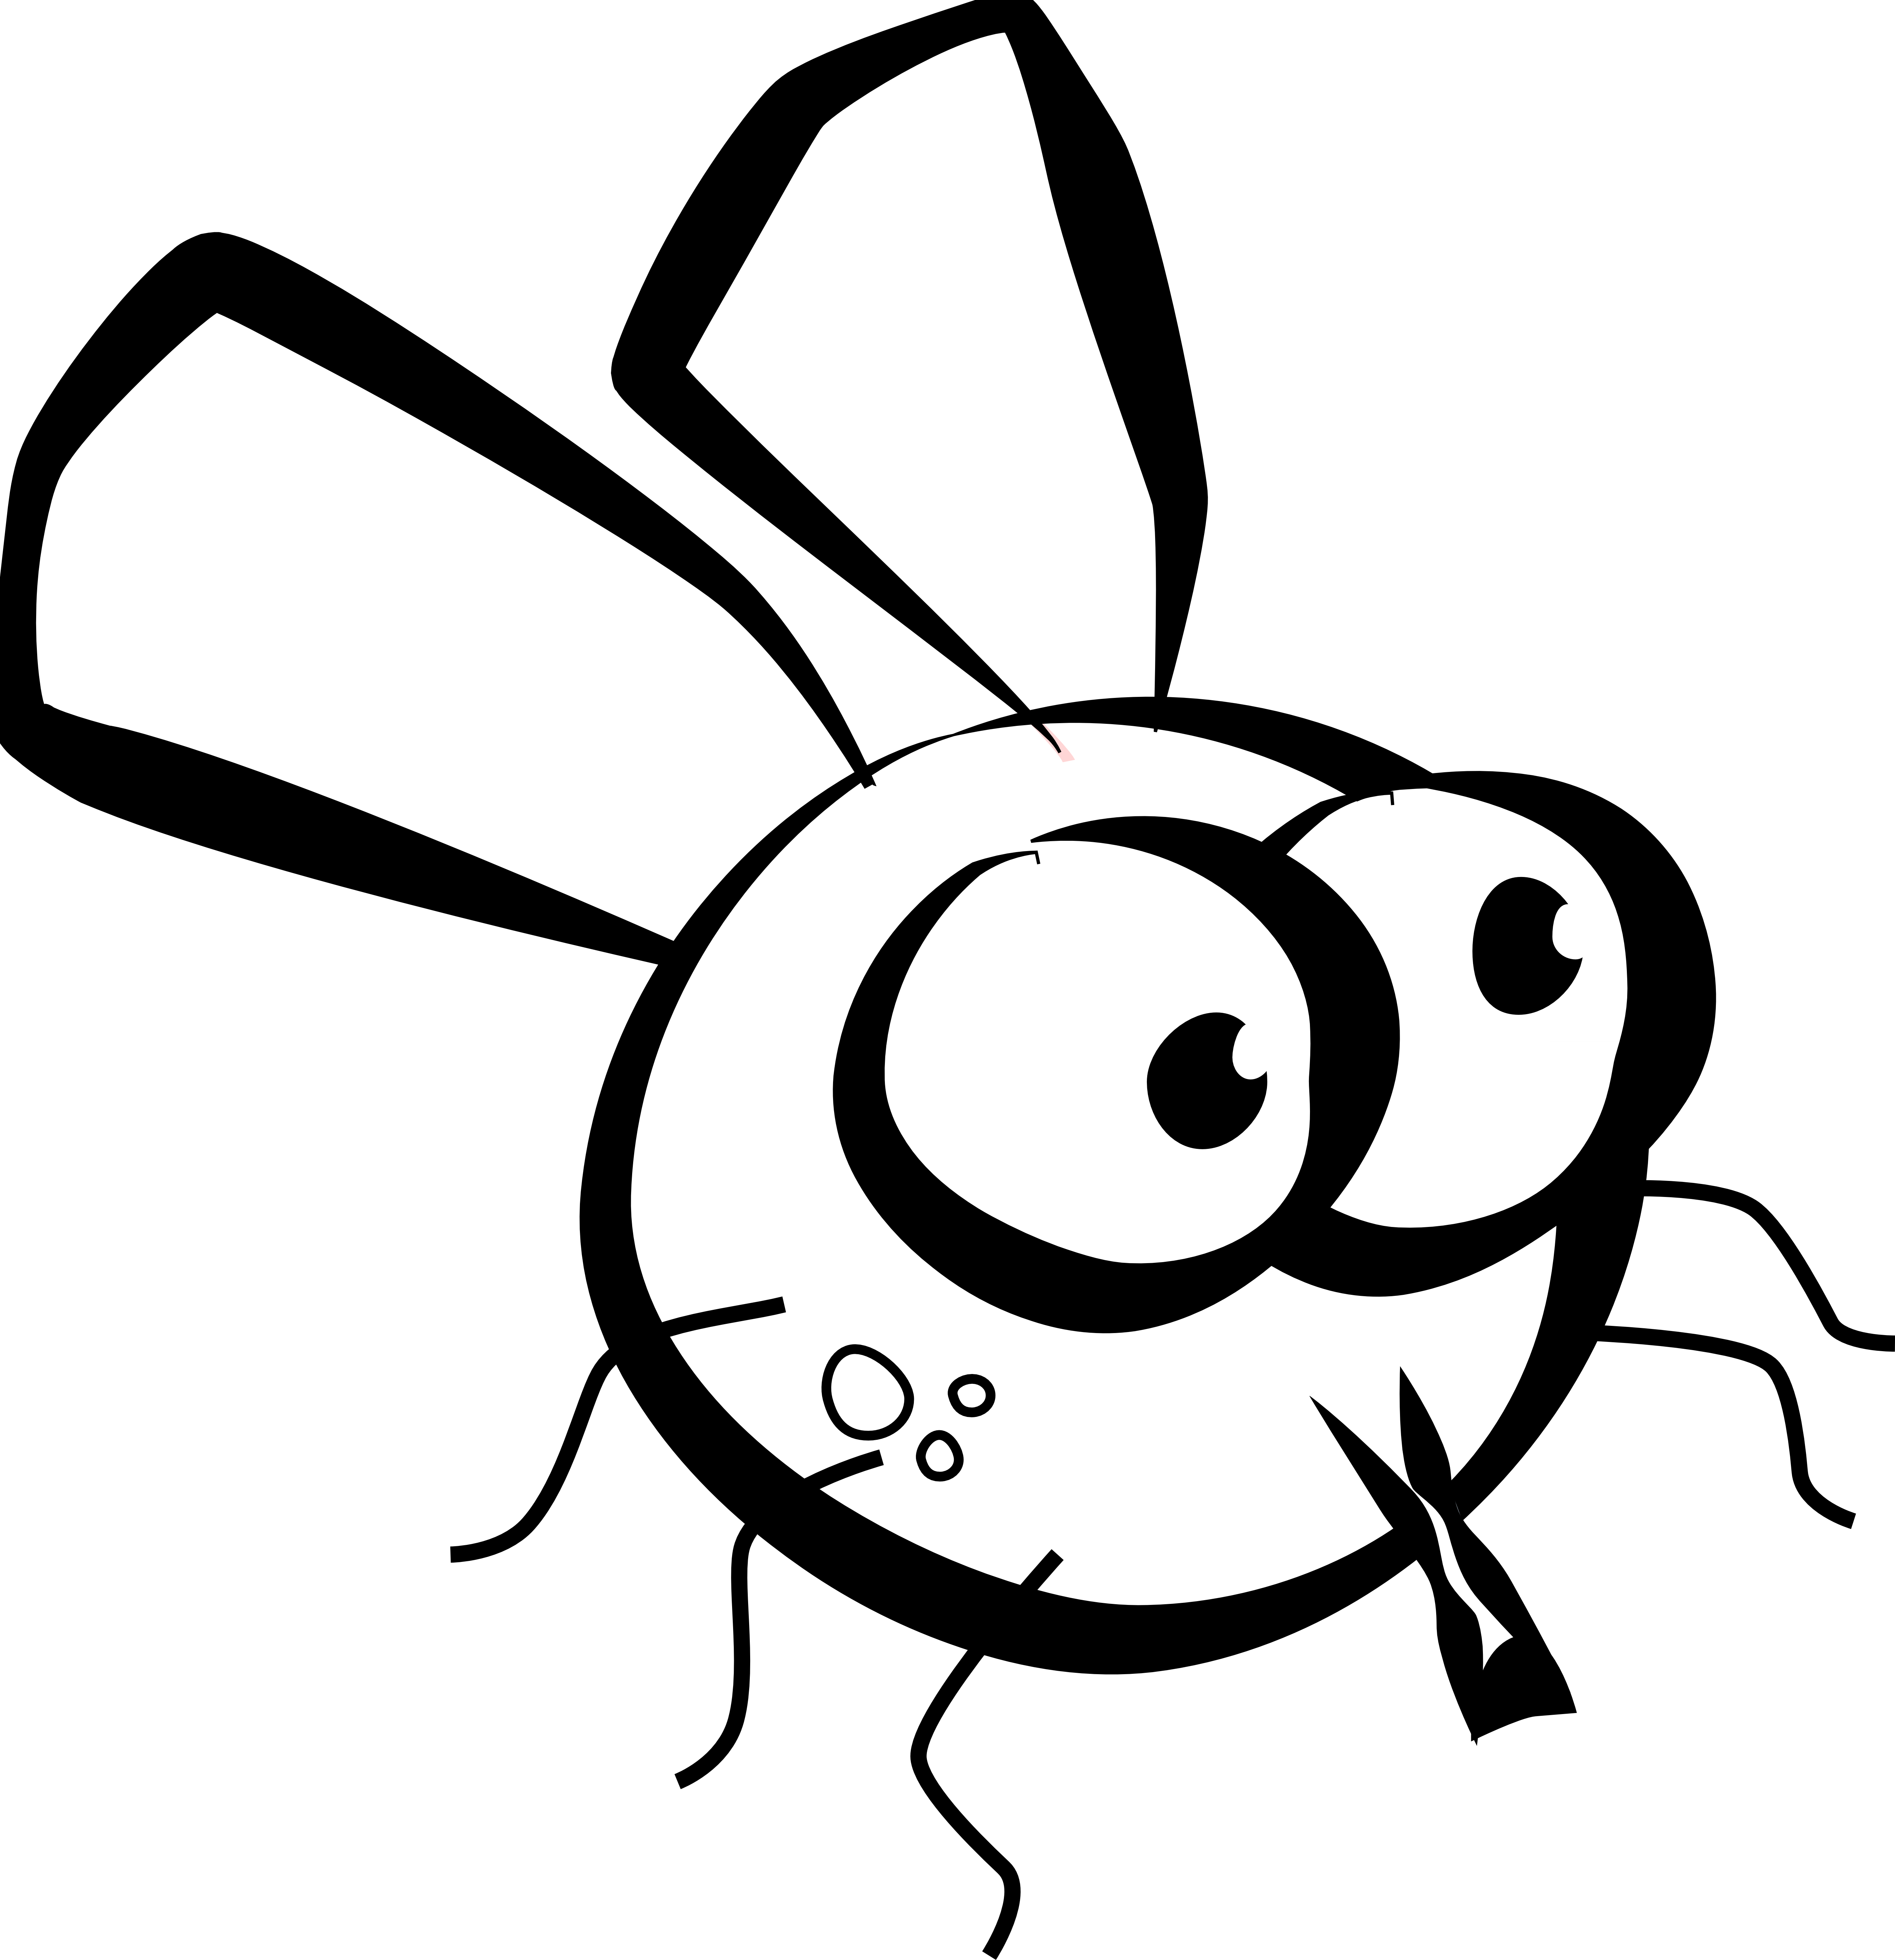 Insect black and white. Worm clipart parasite